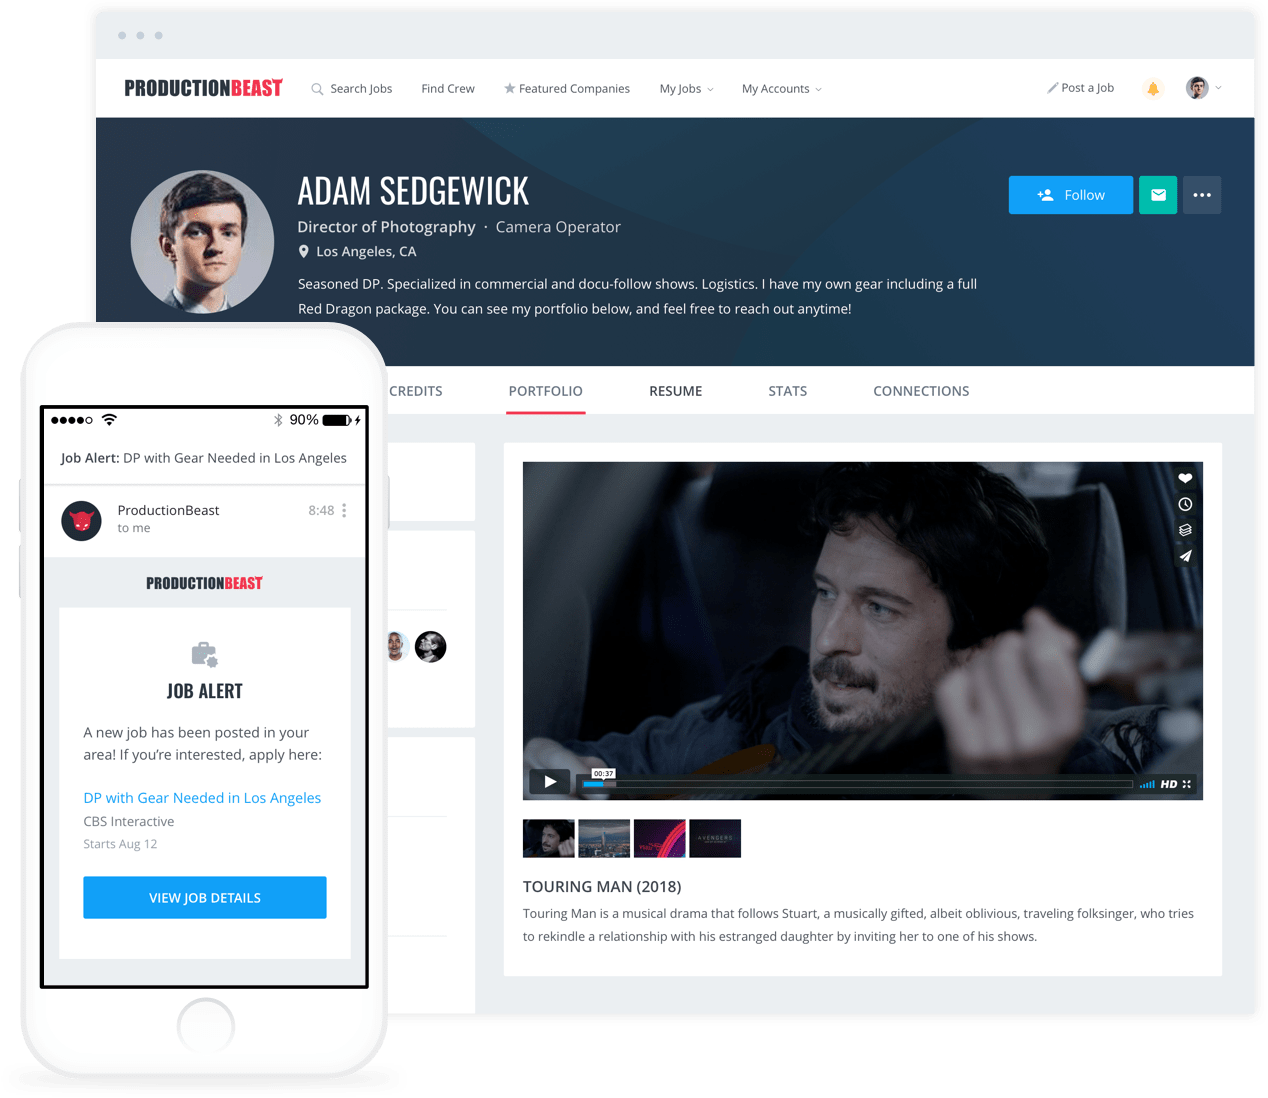 ProductionBeast: Job Alerts Email and Profile Page